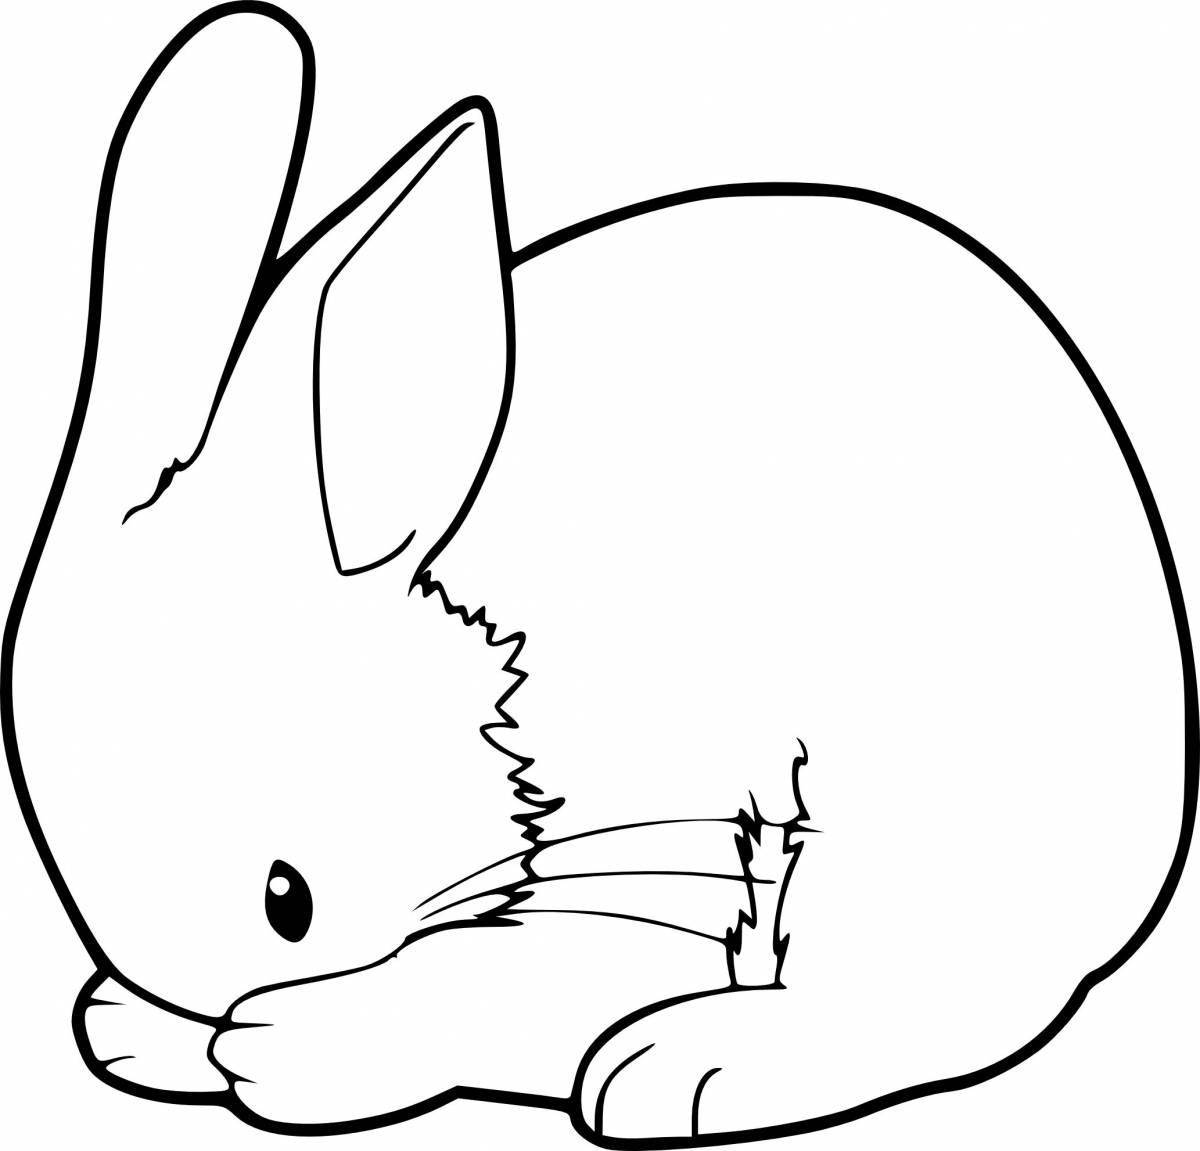 Snuggly coloring bunny